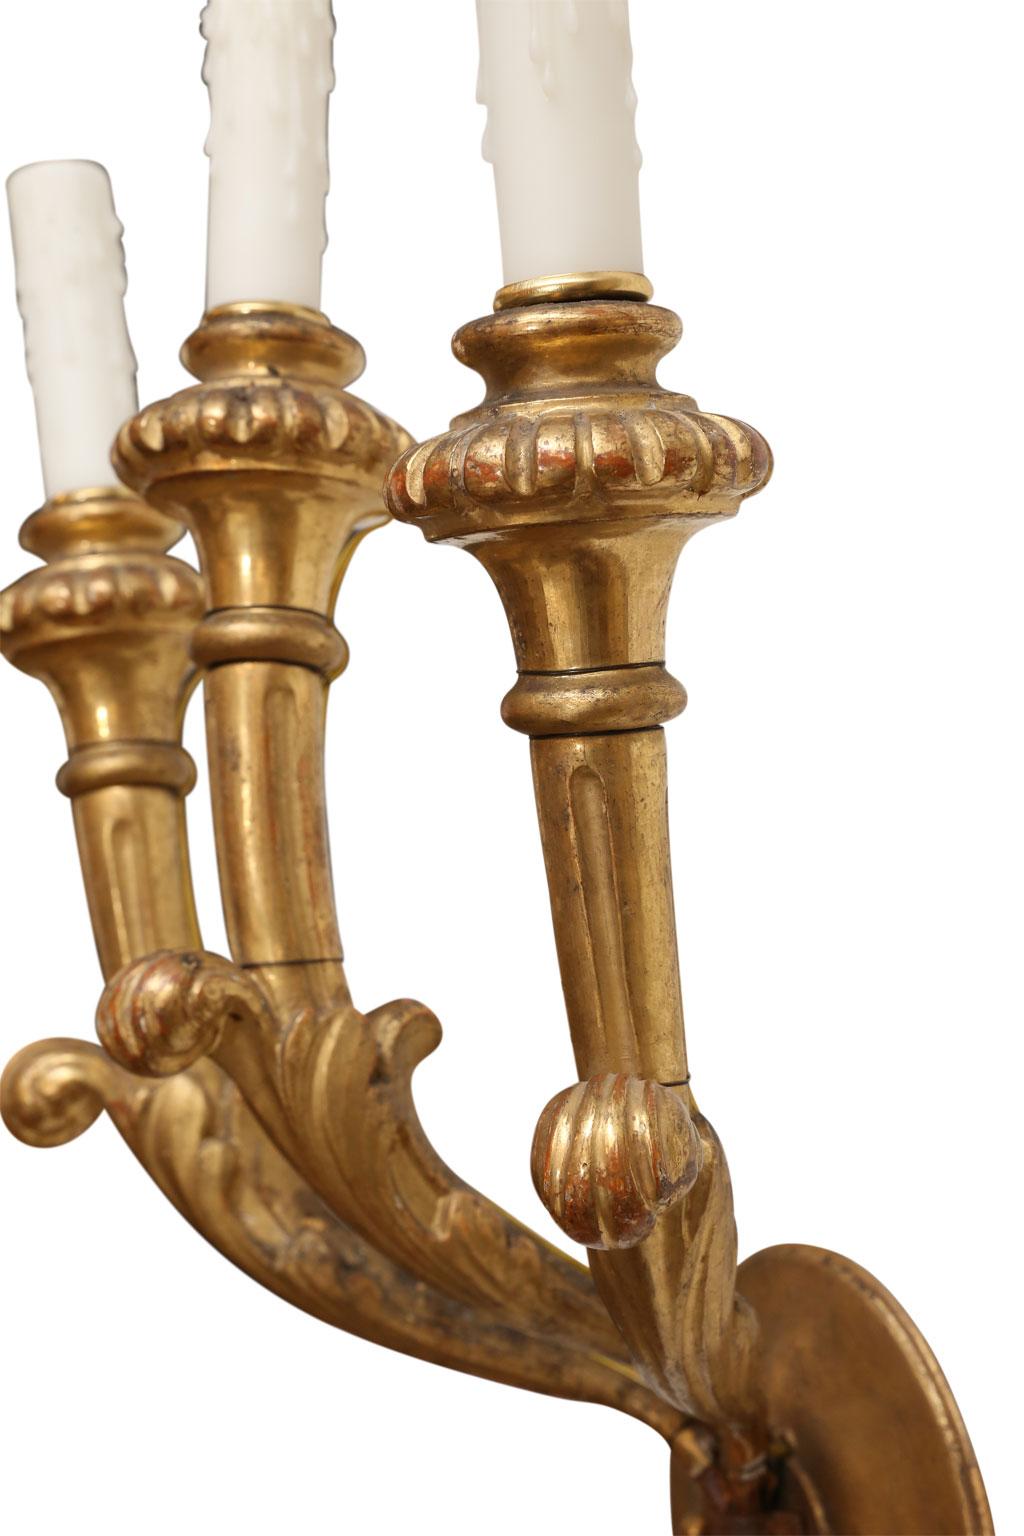 Pair of Italian giltwood sconces, hand-carved with three arms each and newly wired for use within the USA. Sconces include new back plates, finished to match sconces, to comply with UL Standard.